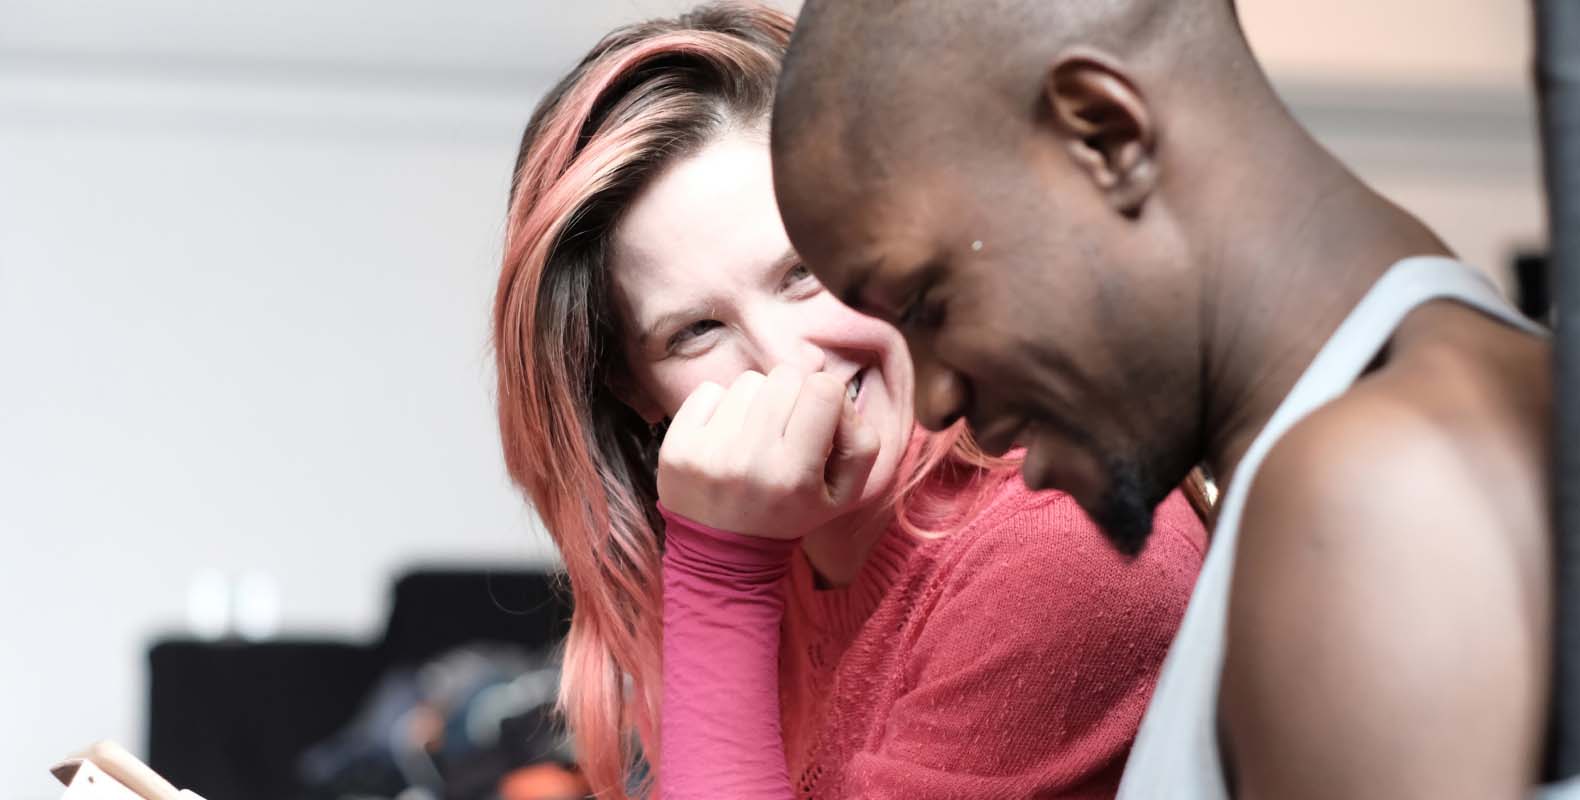 Woman laughing with smiling man.